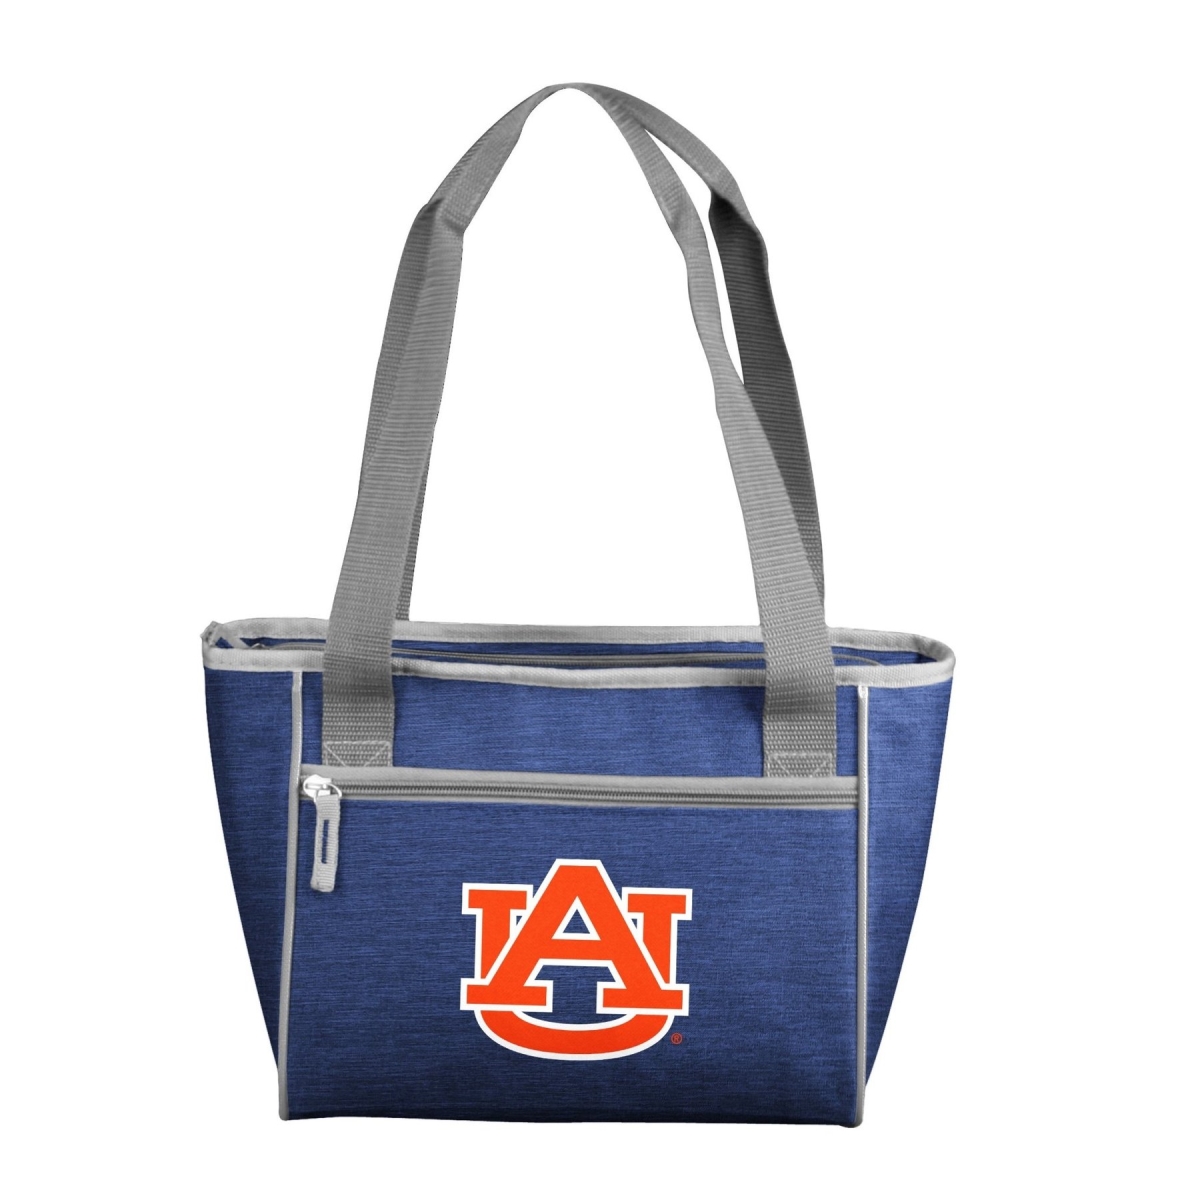 Logo Chair 110-83-CR1 NCAA Auburn Tigers Crosshatch Cooler Tote Bag Holds for 16 Cans